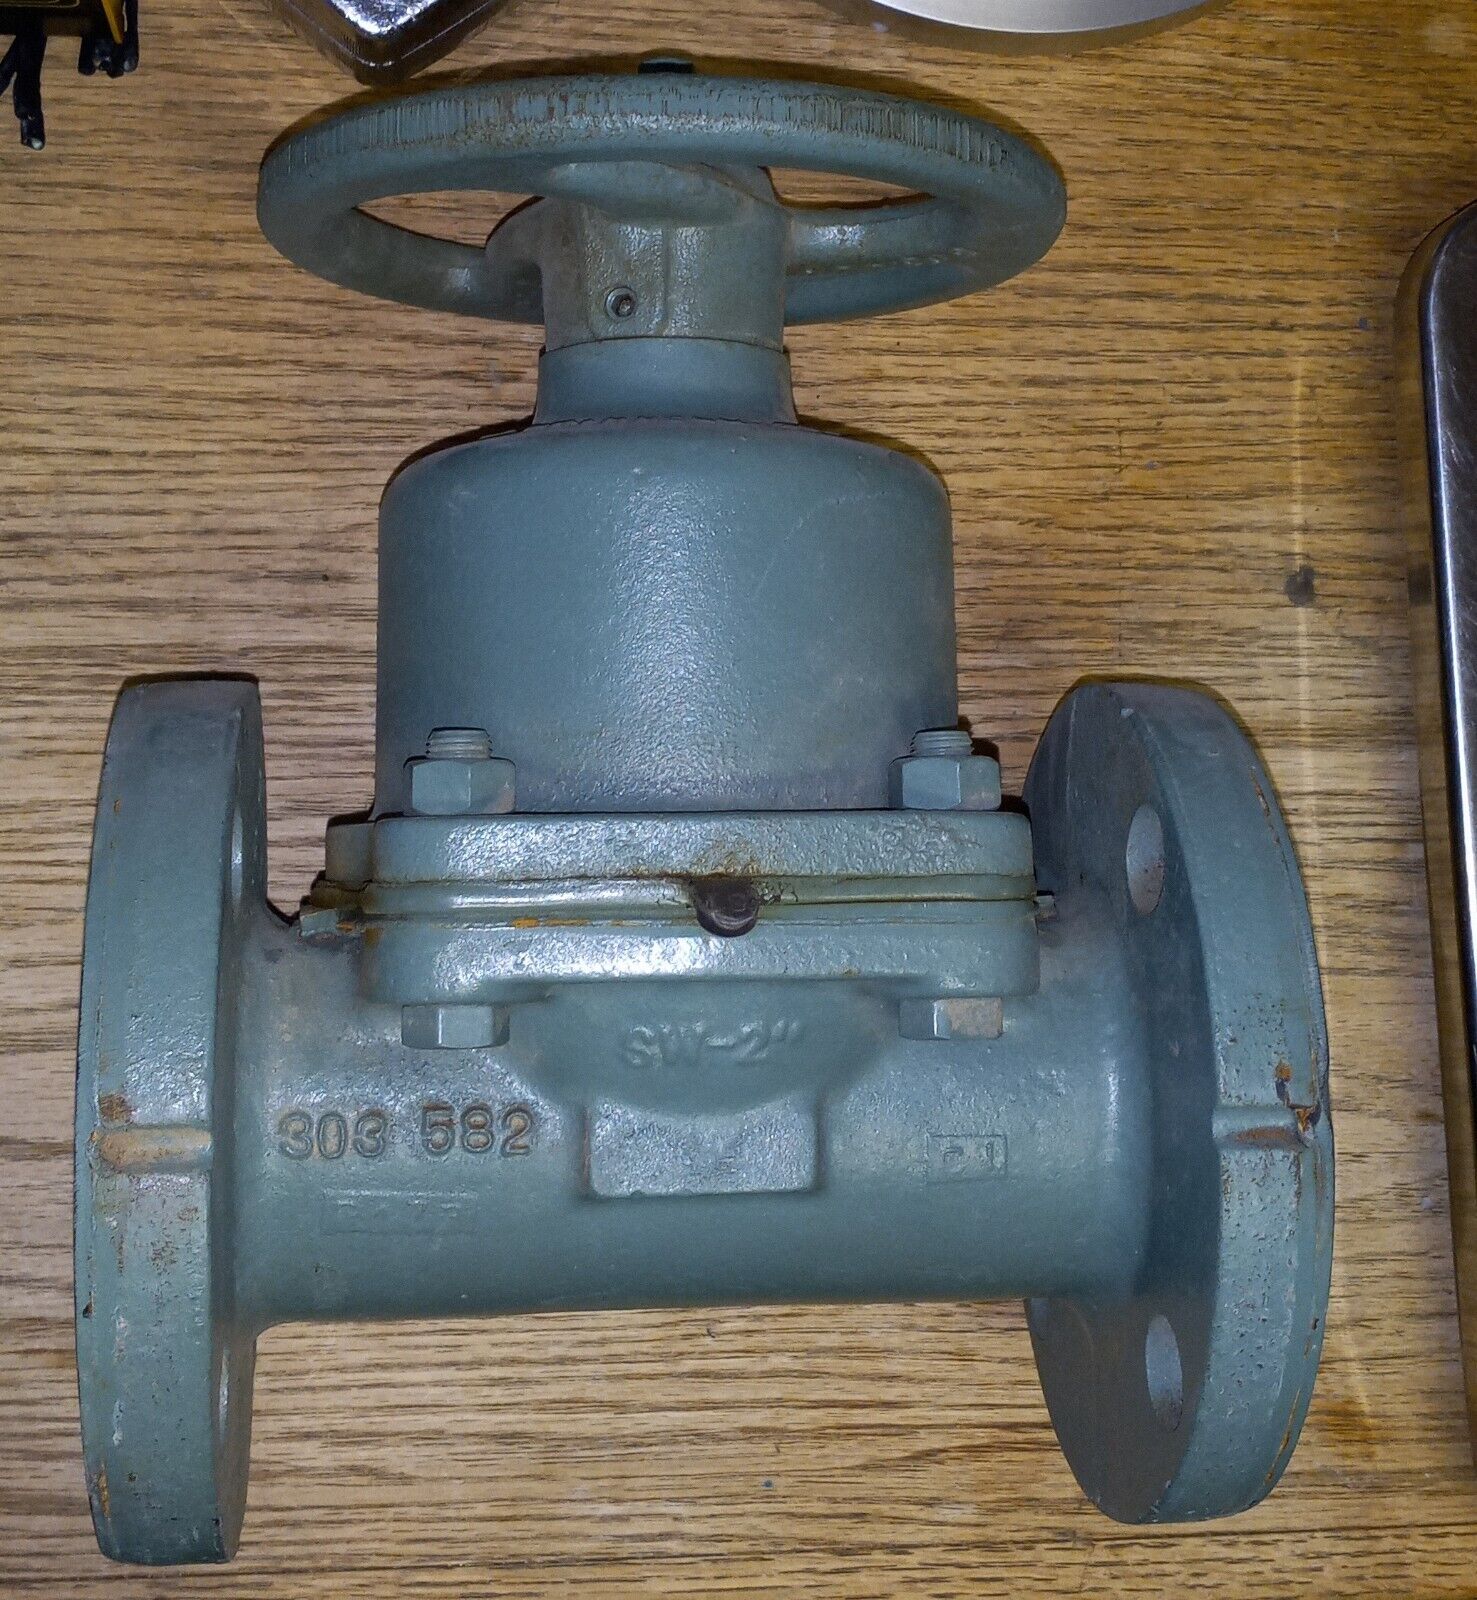 Straight Diaphragm Valve Soft Rubber Lined Itt Grinnell 2" Ff Flanged Cast Iron